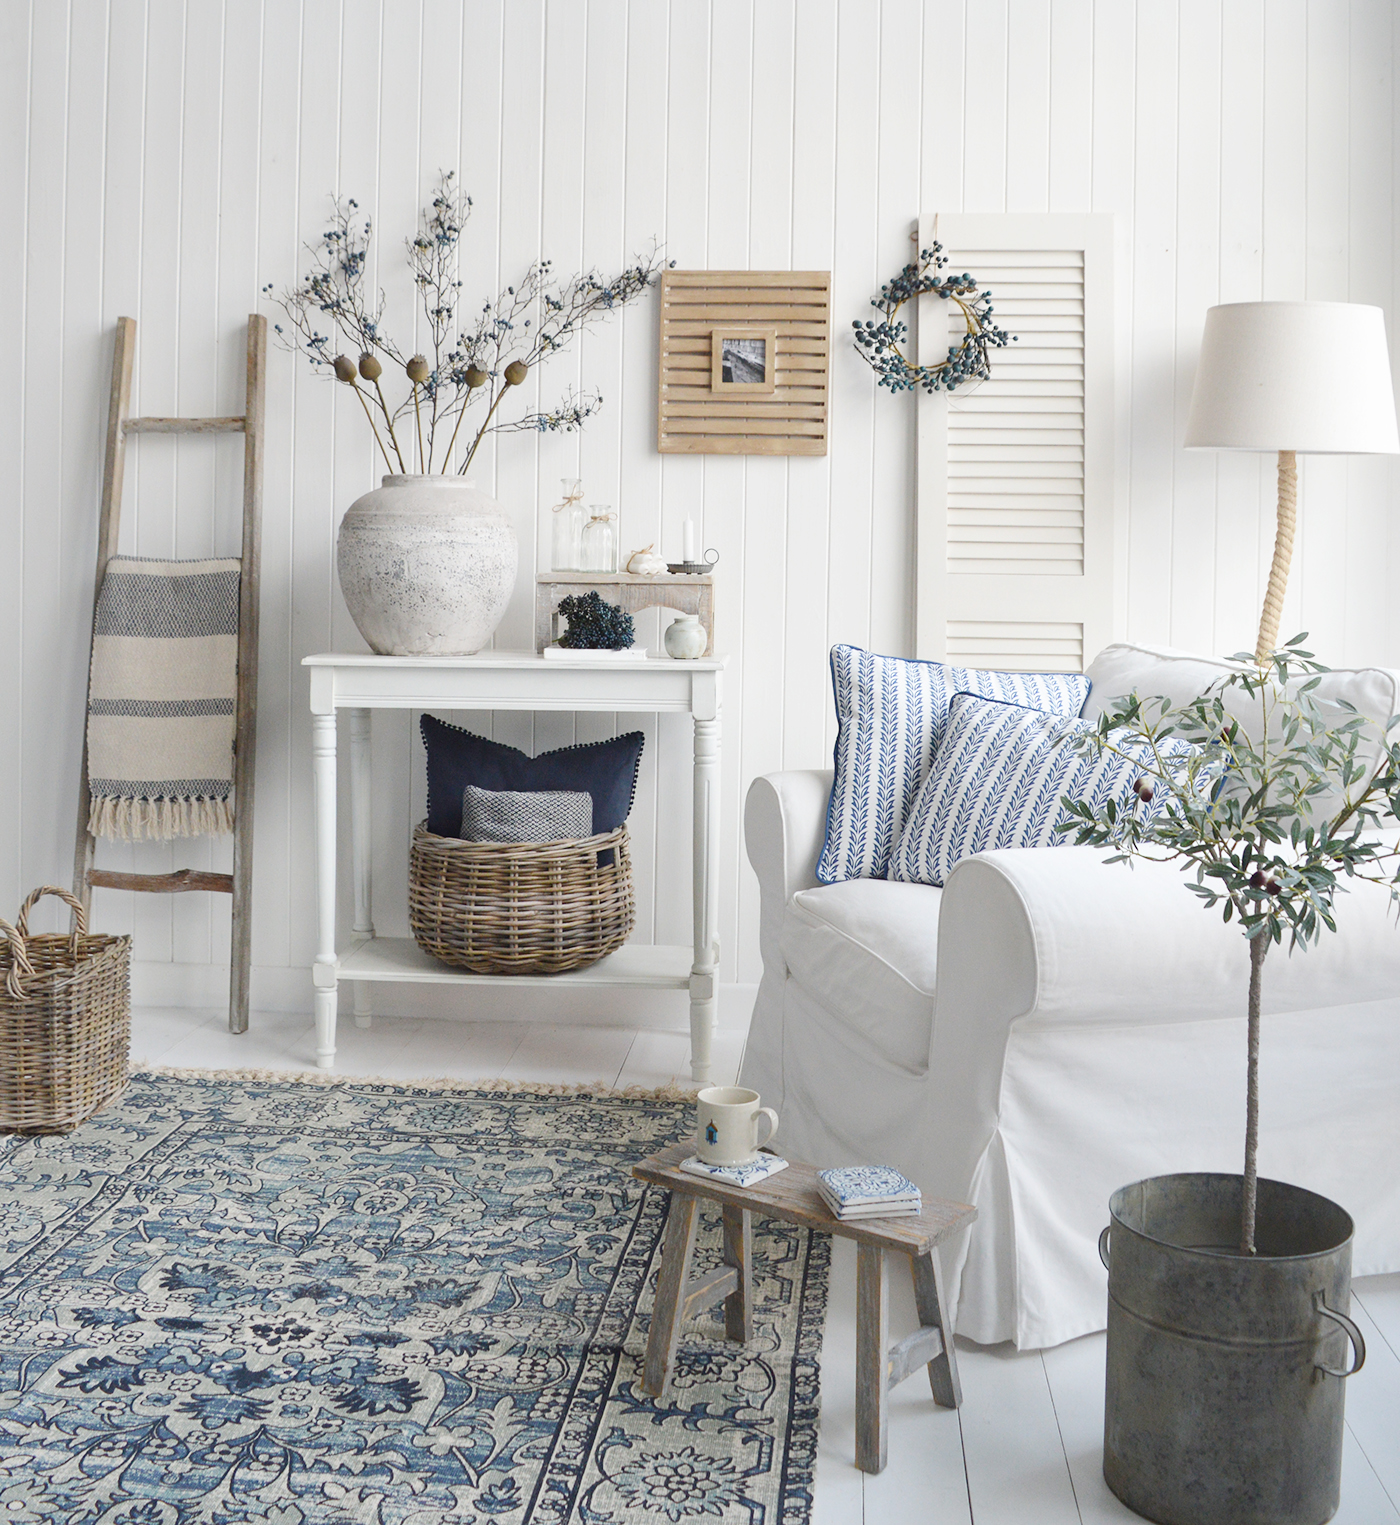 New England interiors with the traditional blue and white home interior. Perfect for all modern country, farmhouse and coastal homes